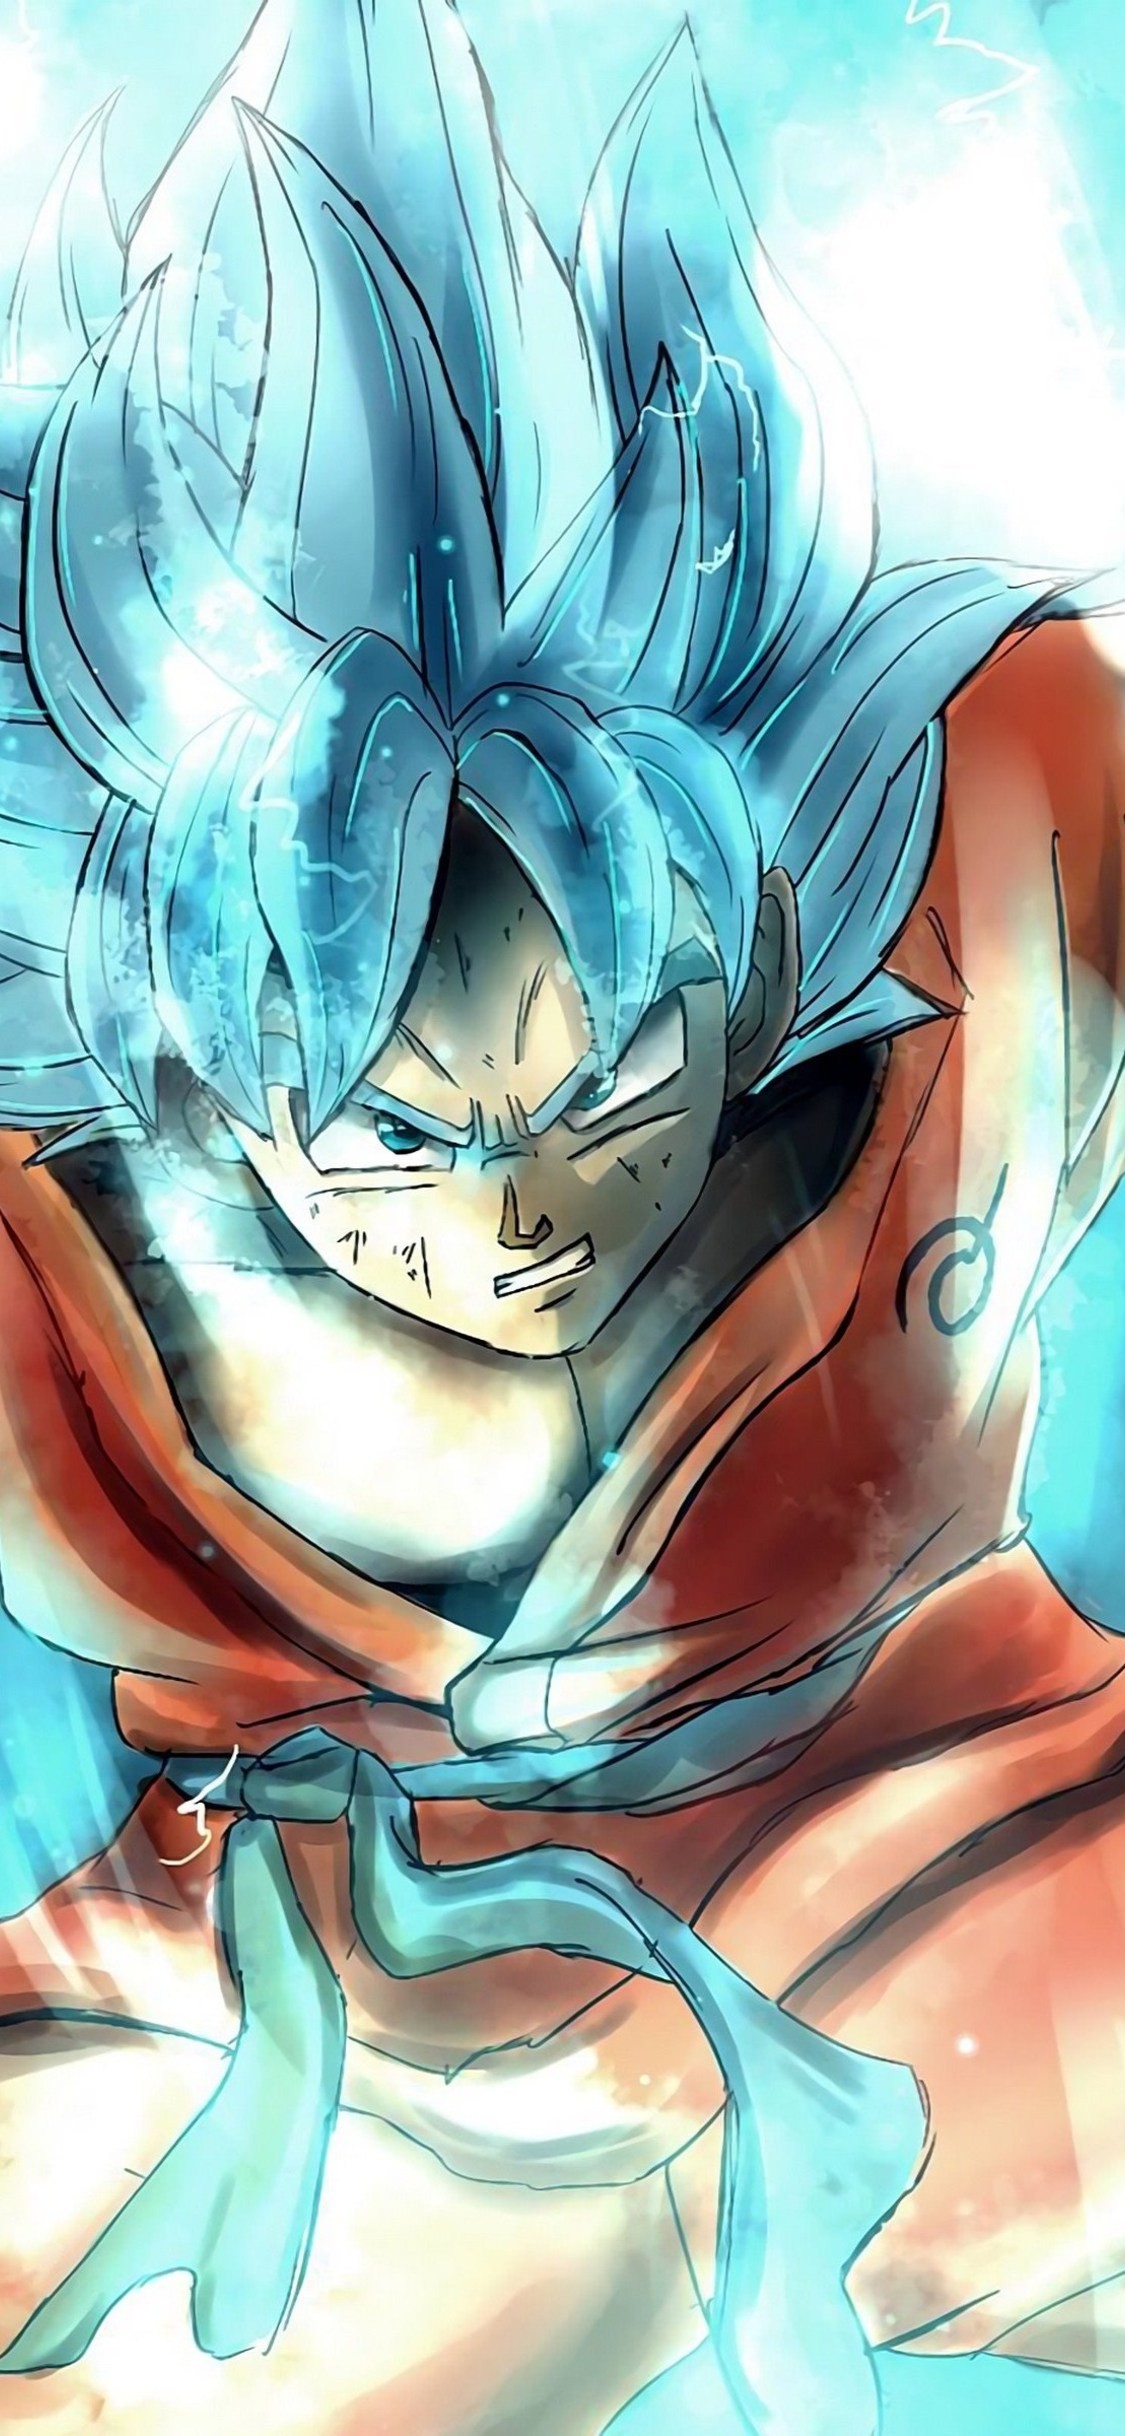 Free download 77 Goku Iphone Wallpapers on WallpaperPlay